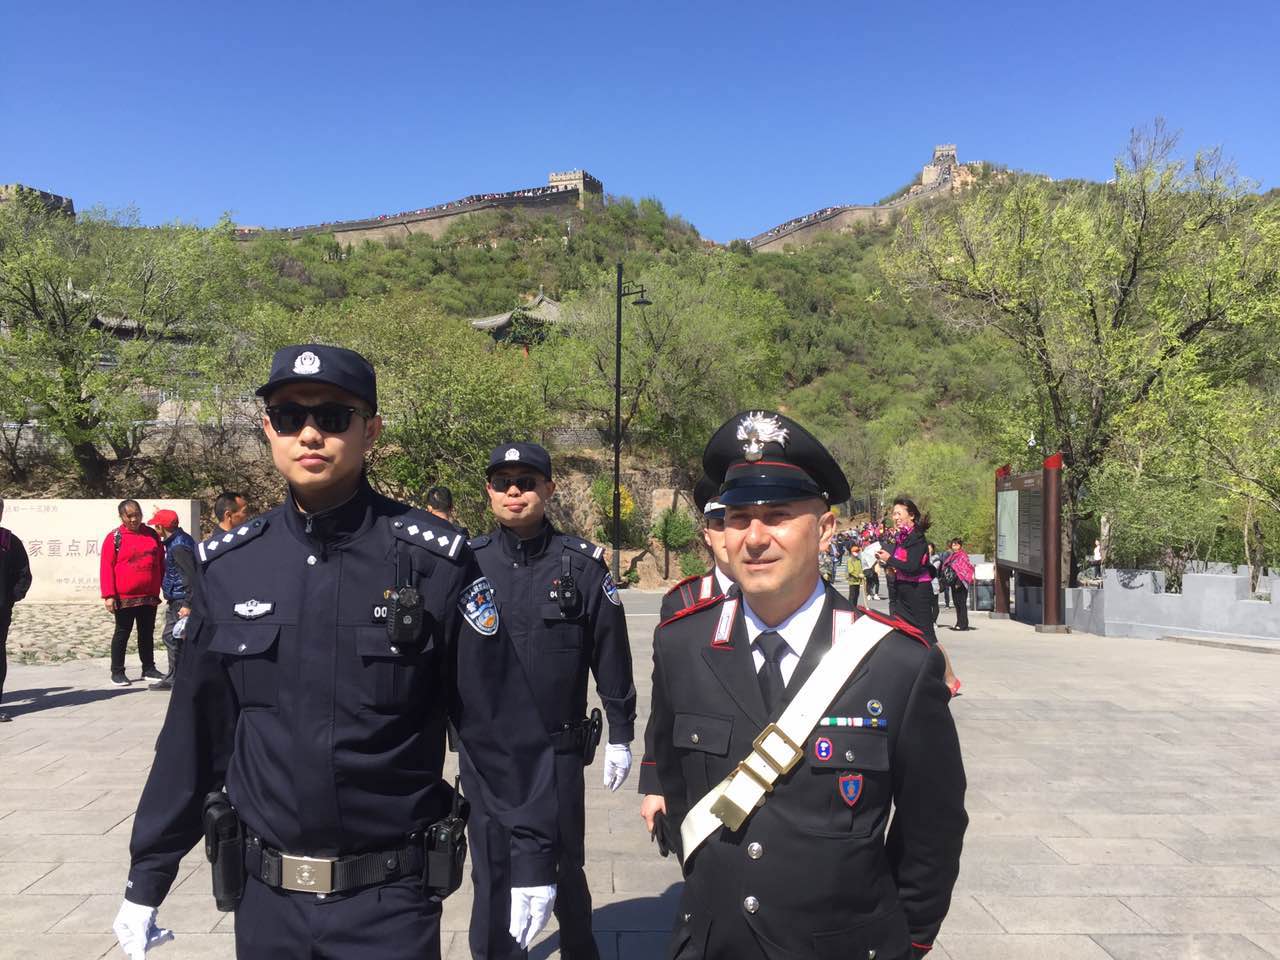 An Italian police officer patrols the Badaling Great Wall in Beijing with his Chinese counterpart on Monday, April 24, 2017. [Photo provided to China Plus]